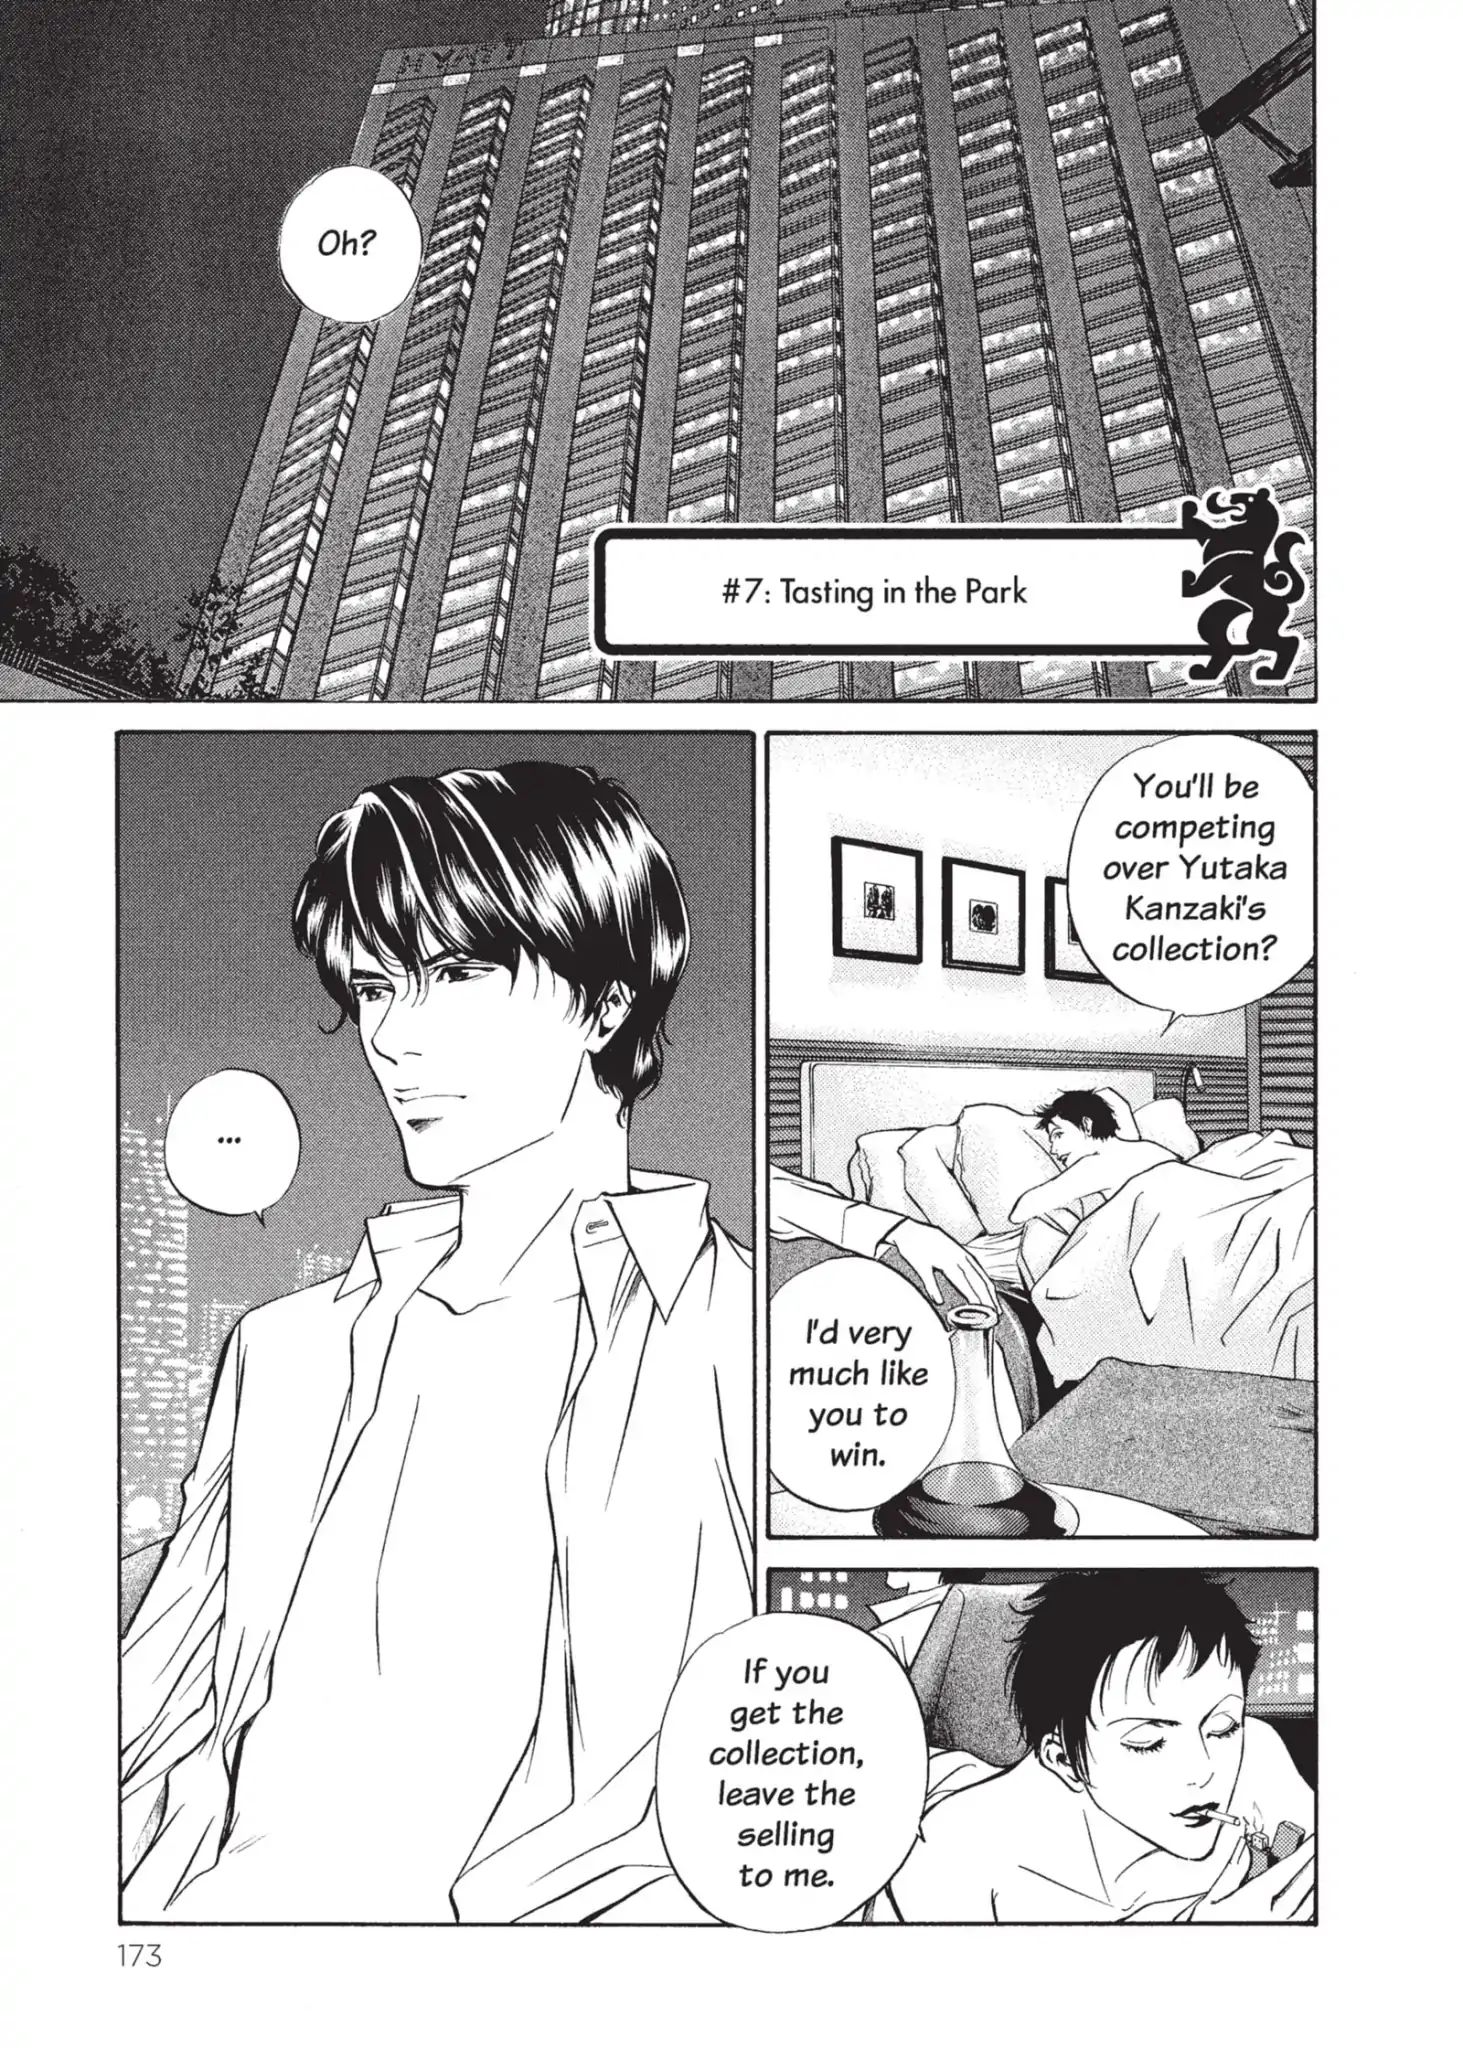 Kami No Shizuku Vol.1 Chapter 7: Tasting In The Park - Picture 1